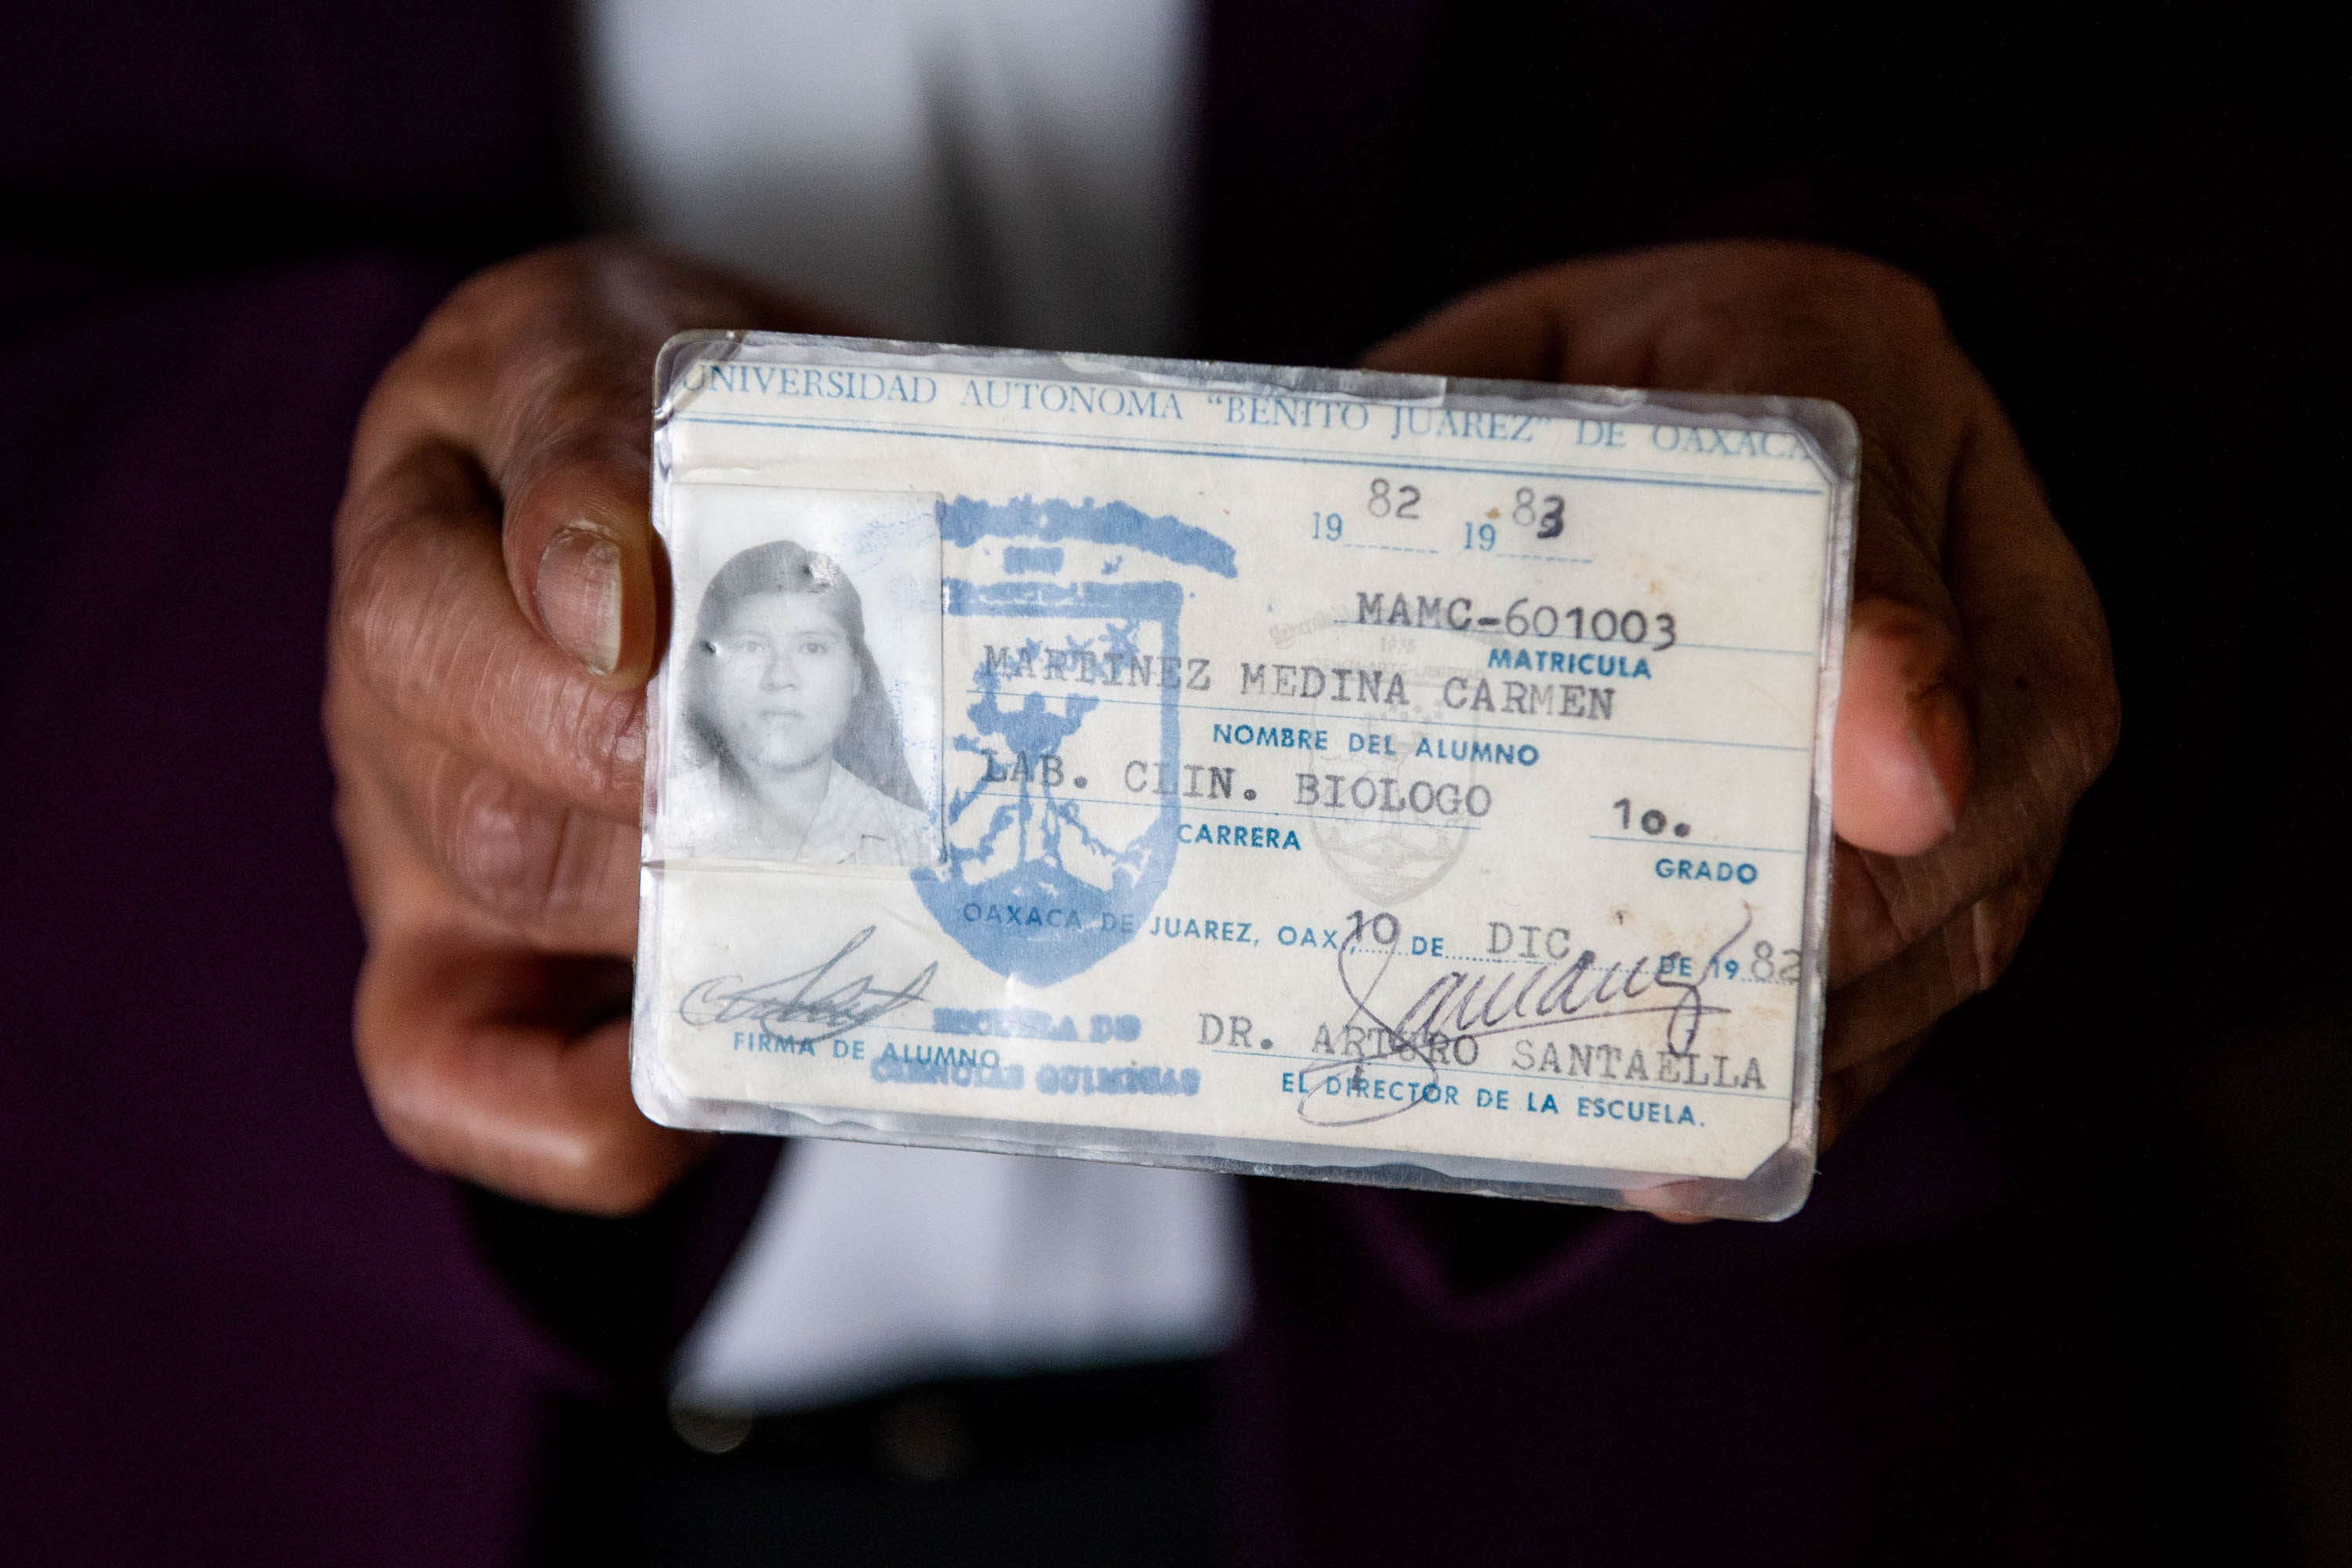 Carmen Medina Martinez holds up her student identification card from when she was enrolled at the Benito Juárez Autonomous University of Oaxaca, a public university located in Oaxaca, Mexico. Medina Martinez studied biology, then became a nurse before coming to the United States. But in America, where she did not speak English, she could only find manual labor work.